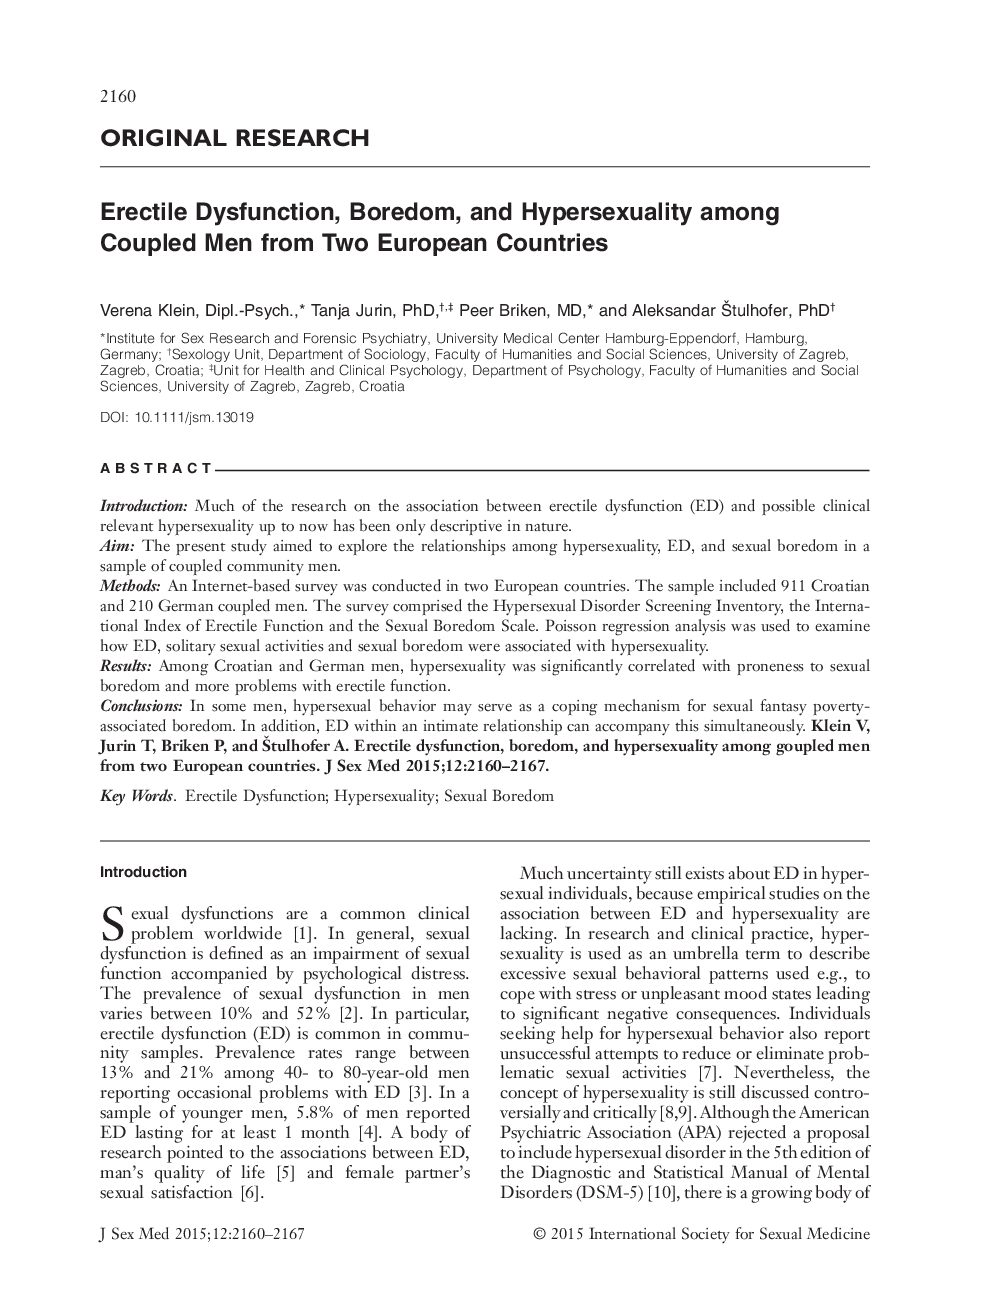 Erectile Dysfunction, Boredom, and Hypersexuality among Coupled Men from Two European Countries